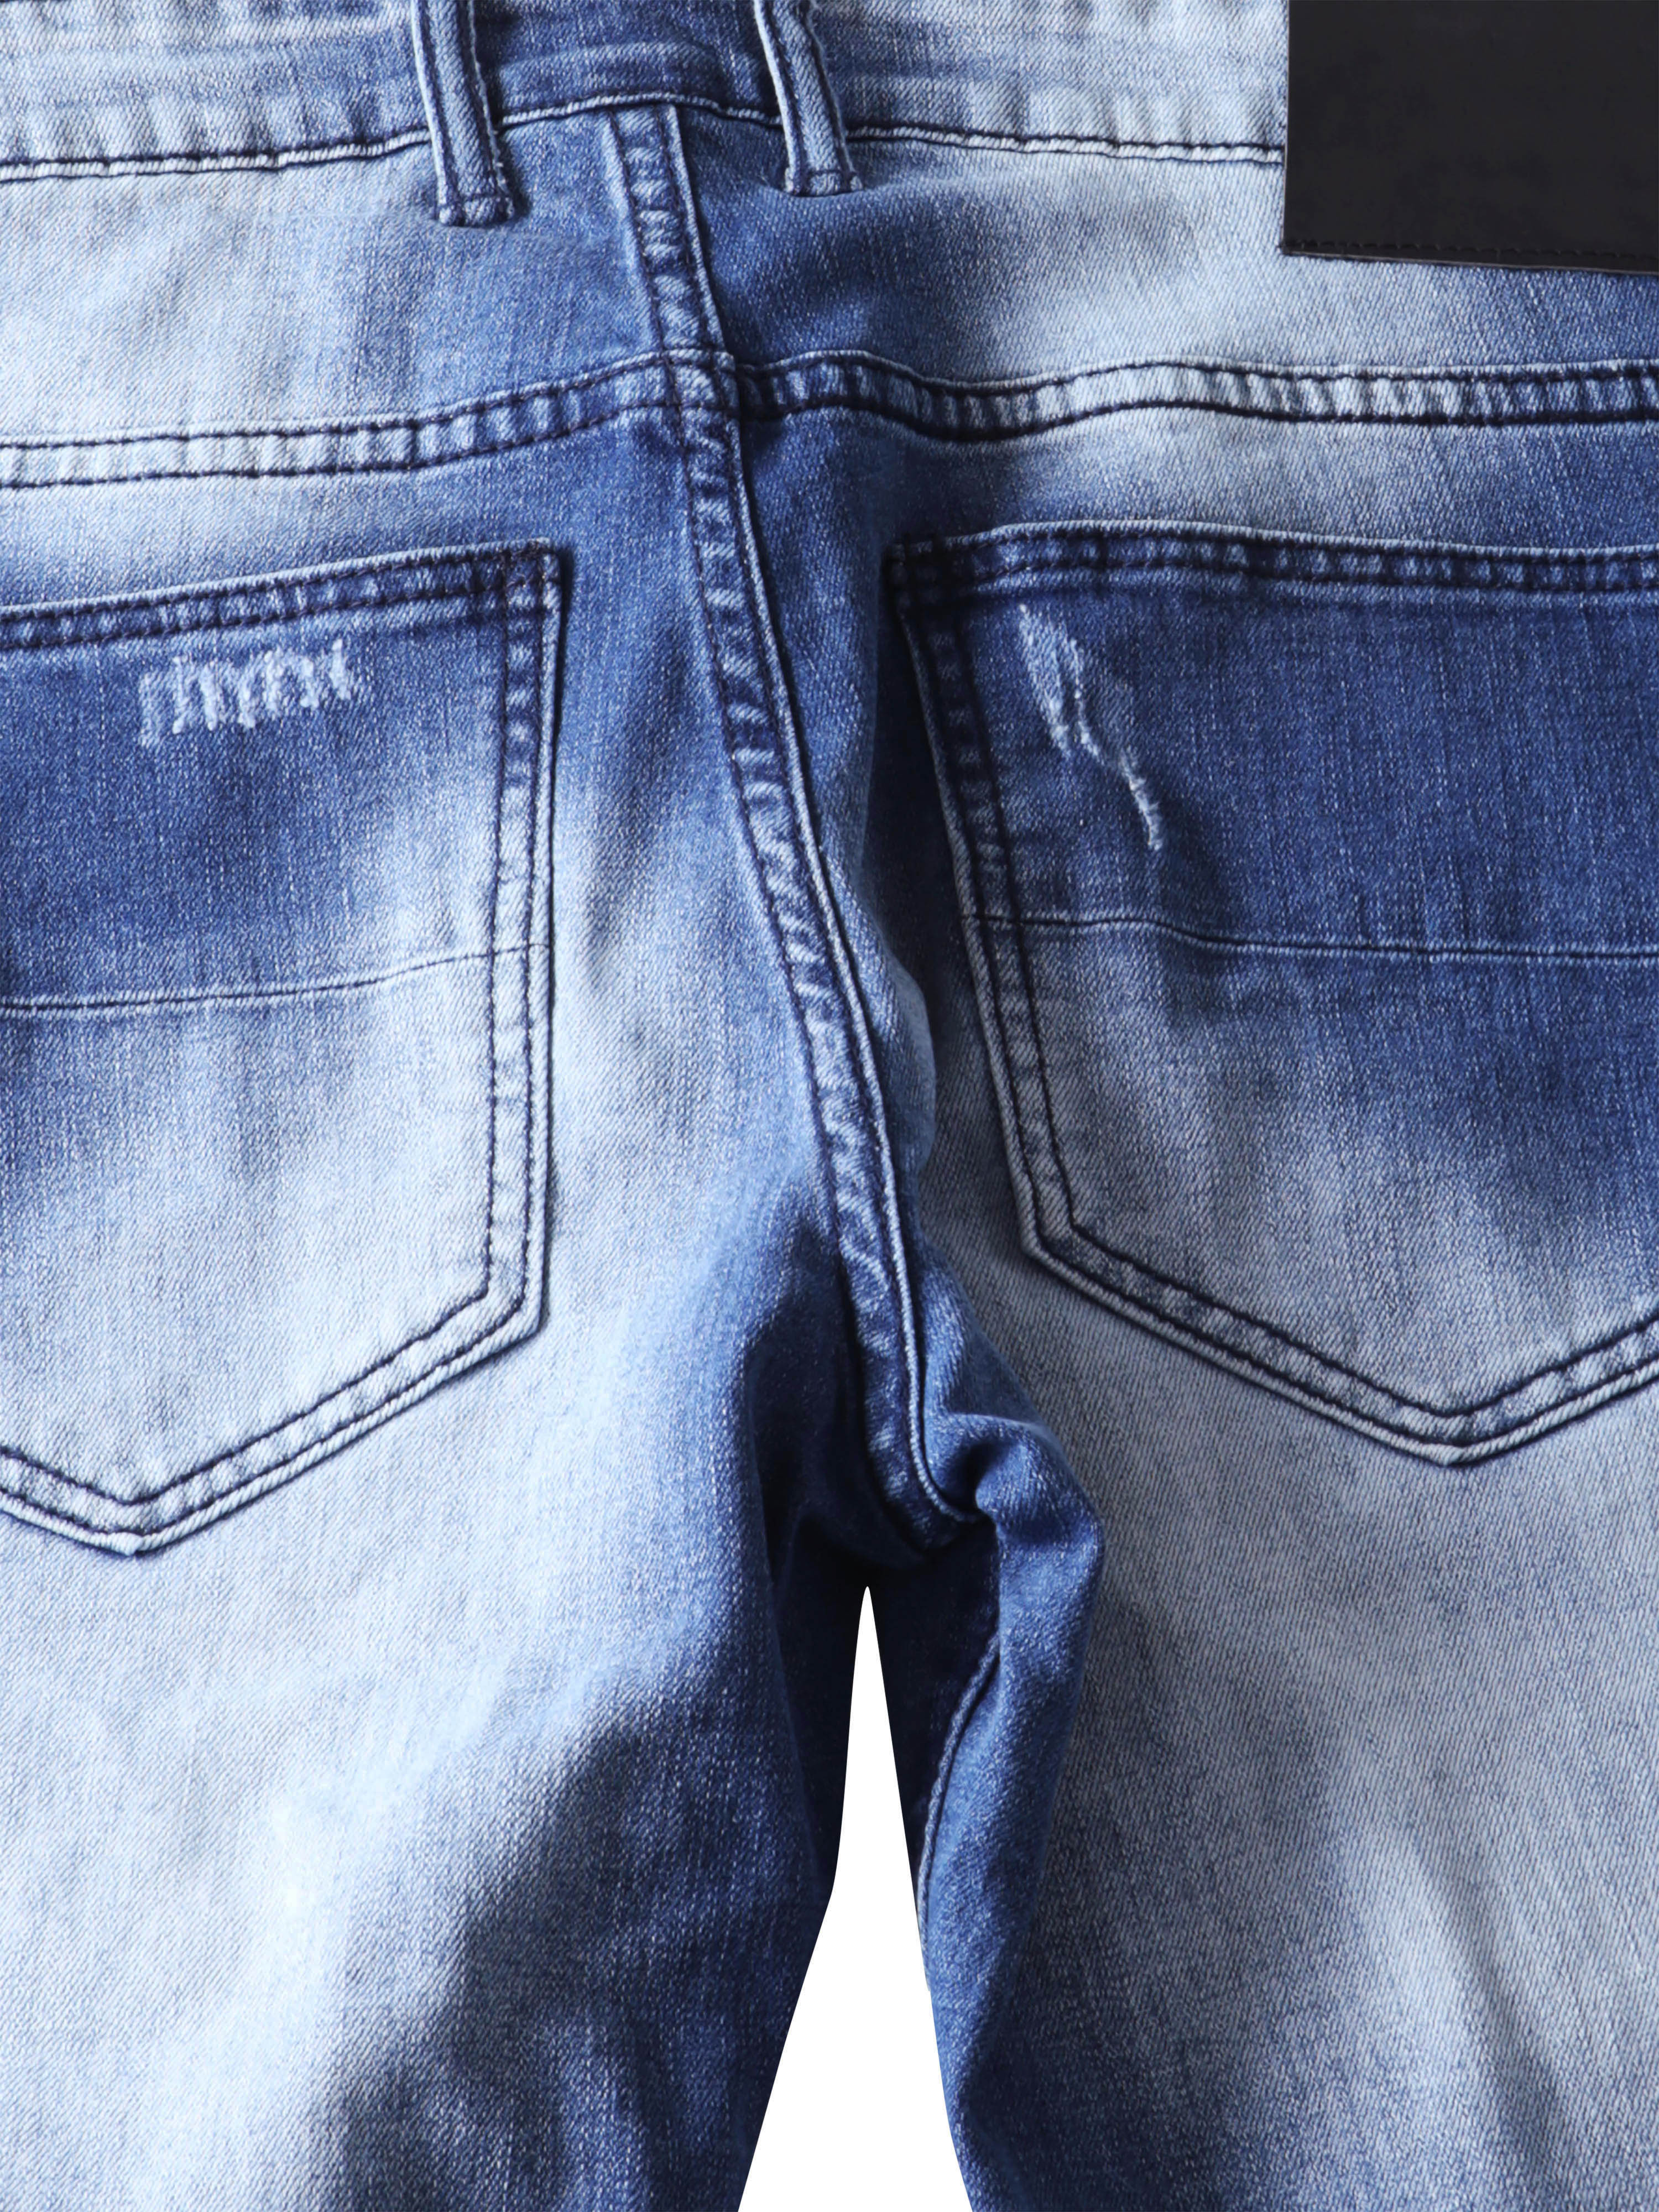 Ma Croix Mens Distressed Skinny Fit Denim Jeans with Zipper Pocket - image 5 of 6